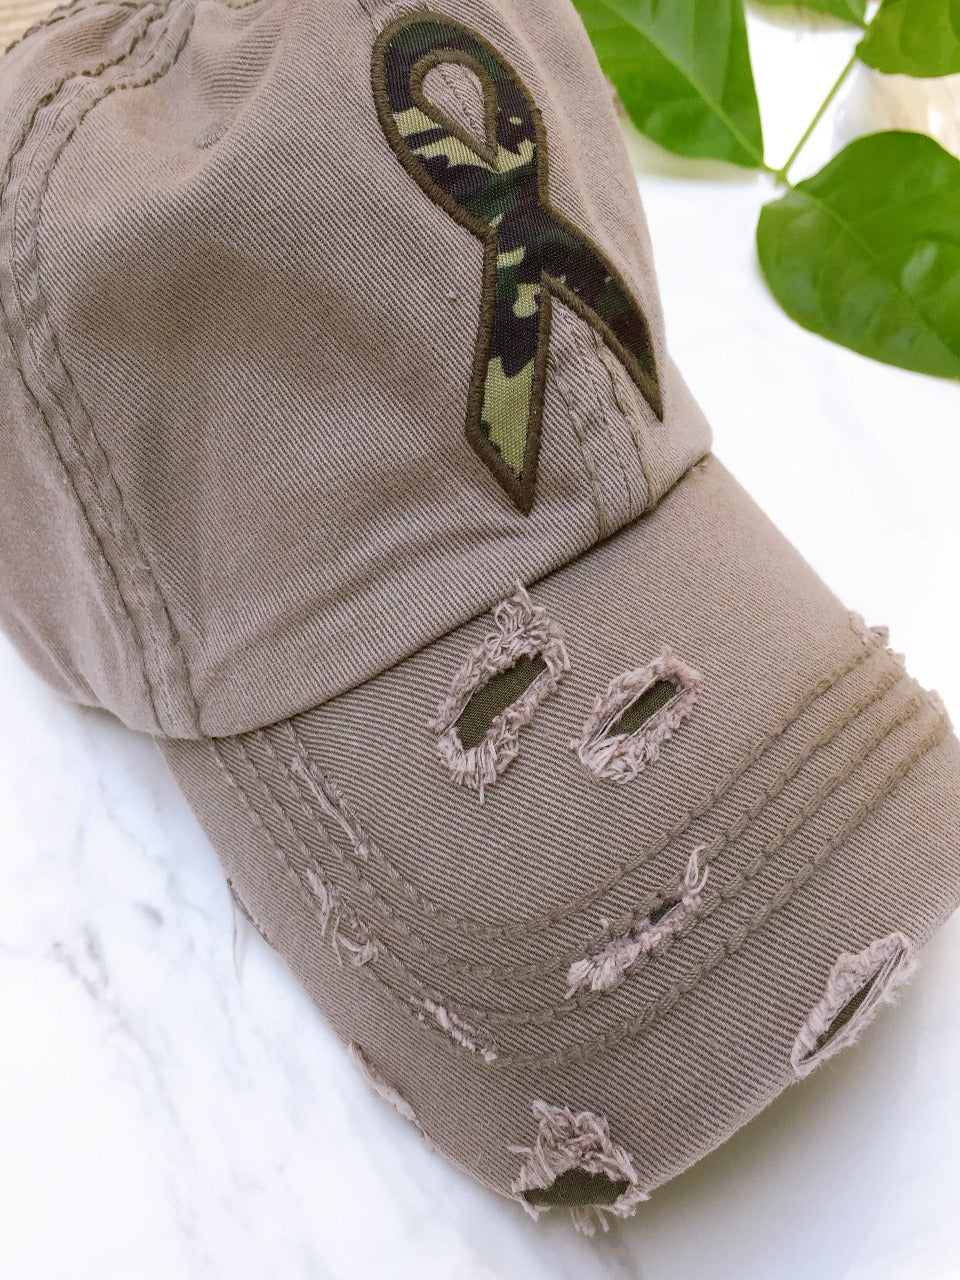 women wearing at beach SUPPORT OUR TROOP BASEBALL CAP